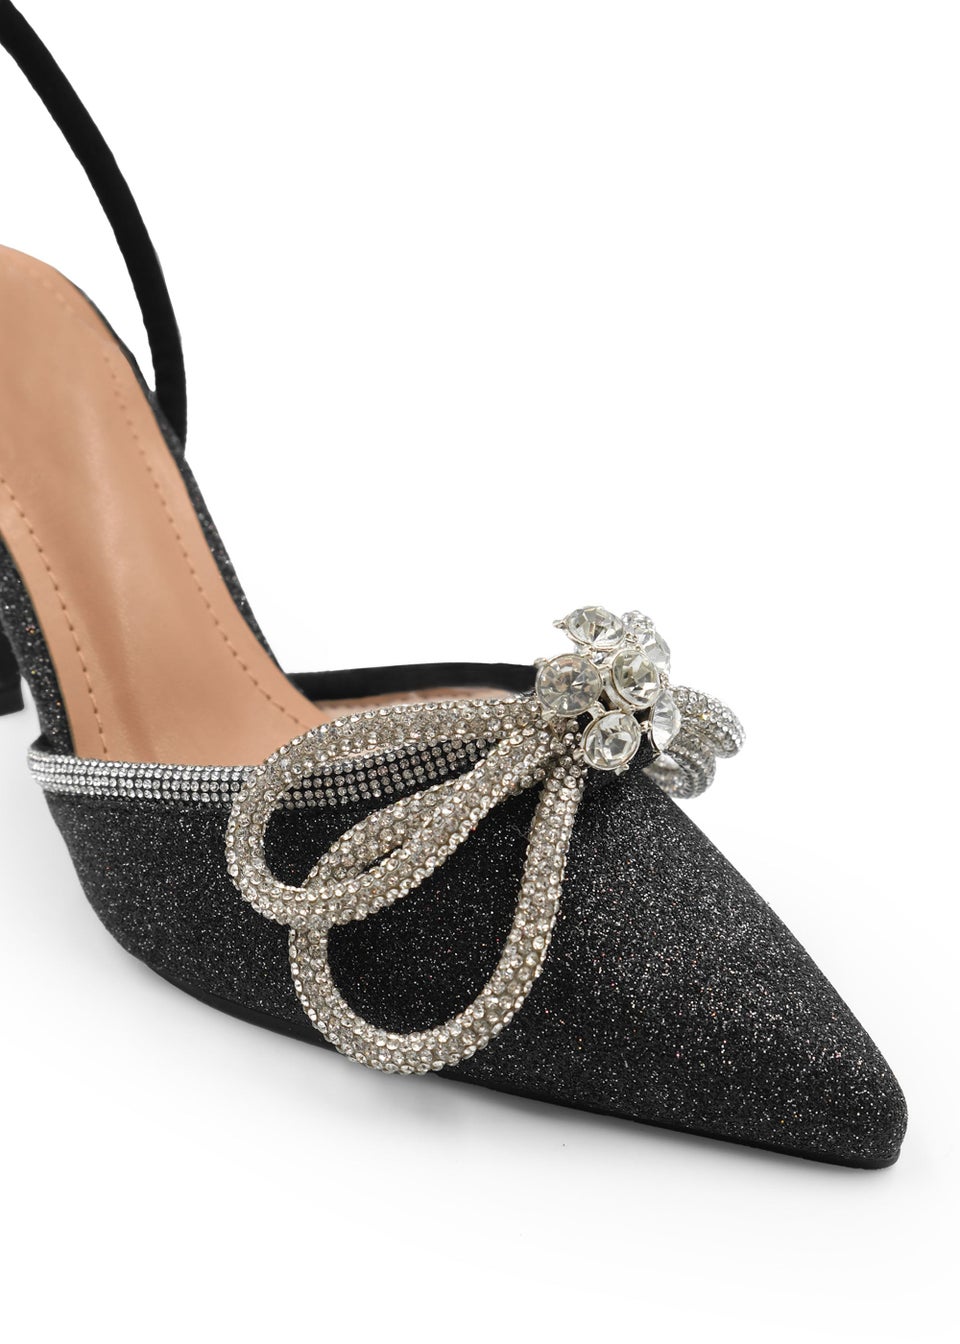 Where's That From Black Glitter Delina Pointed Toe High Heels